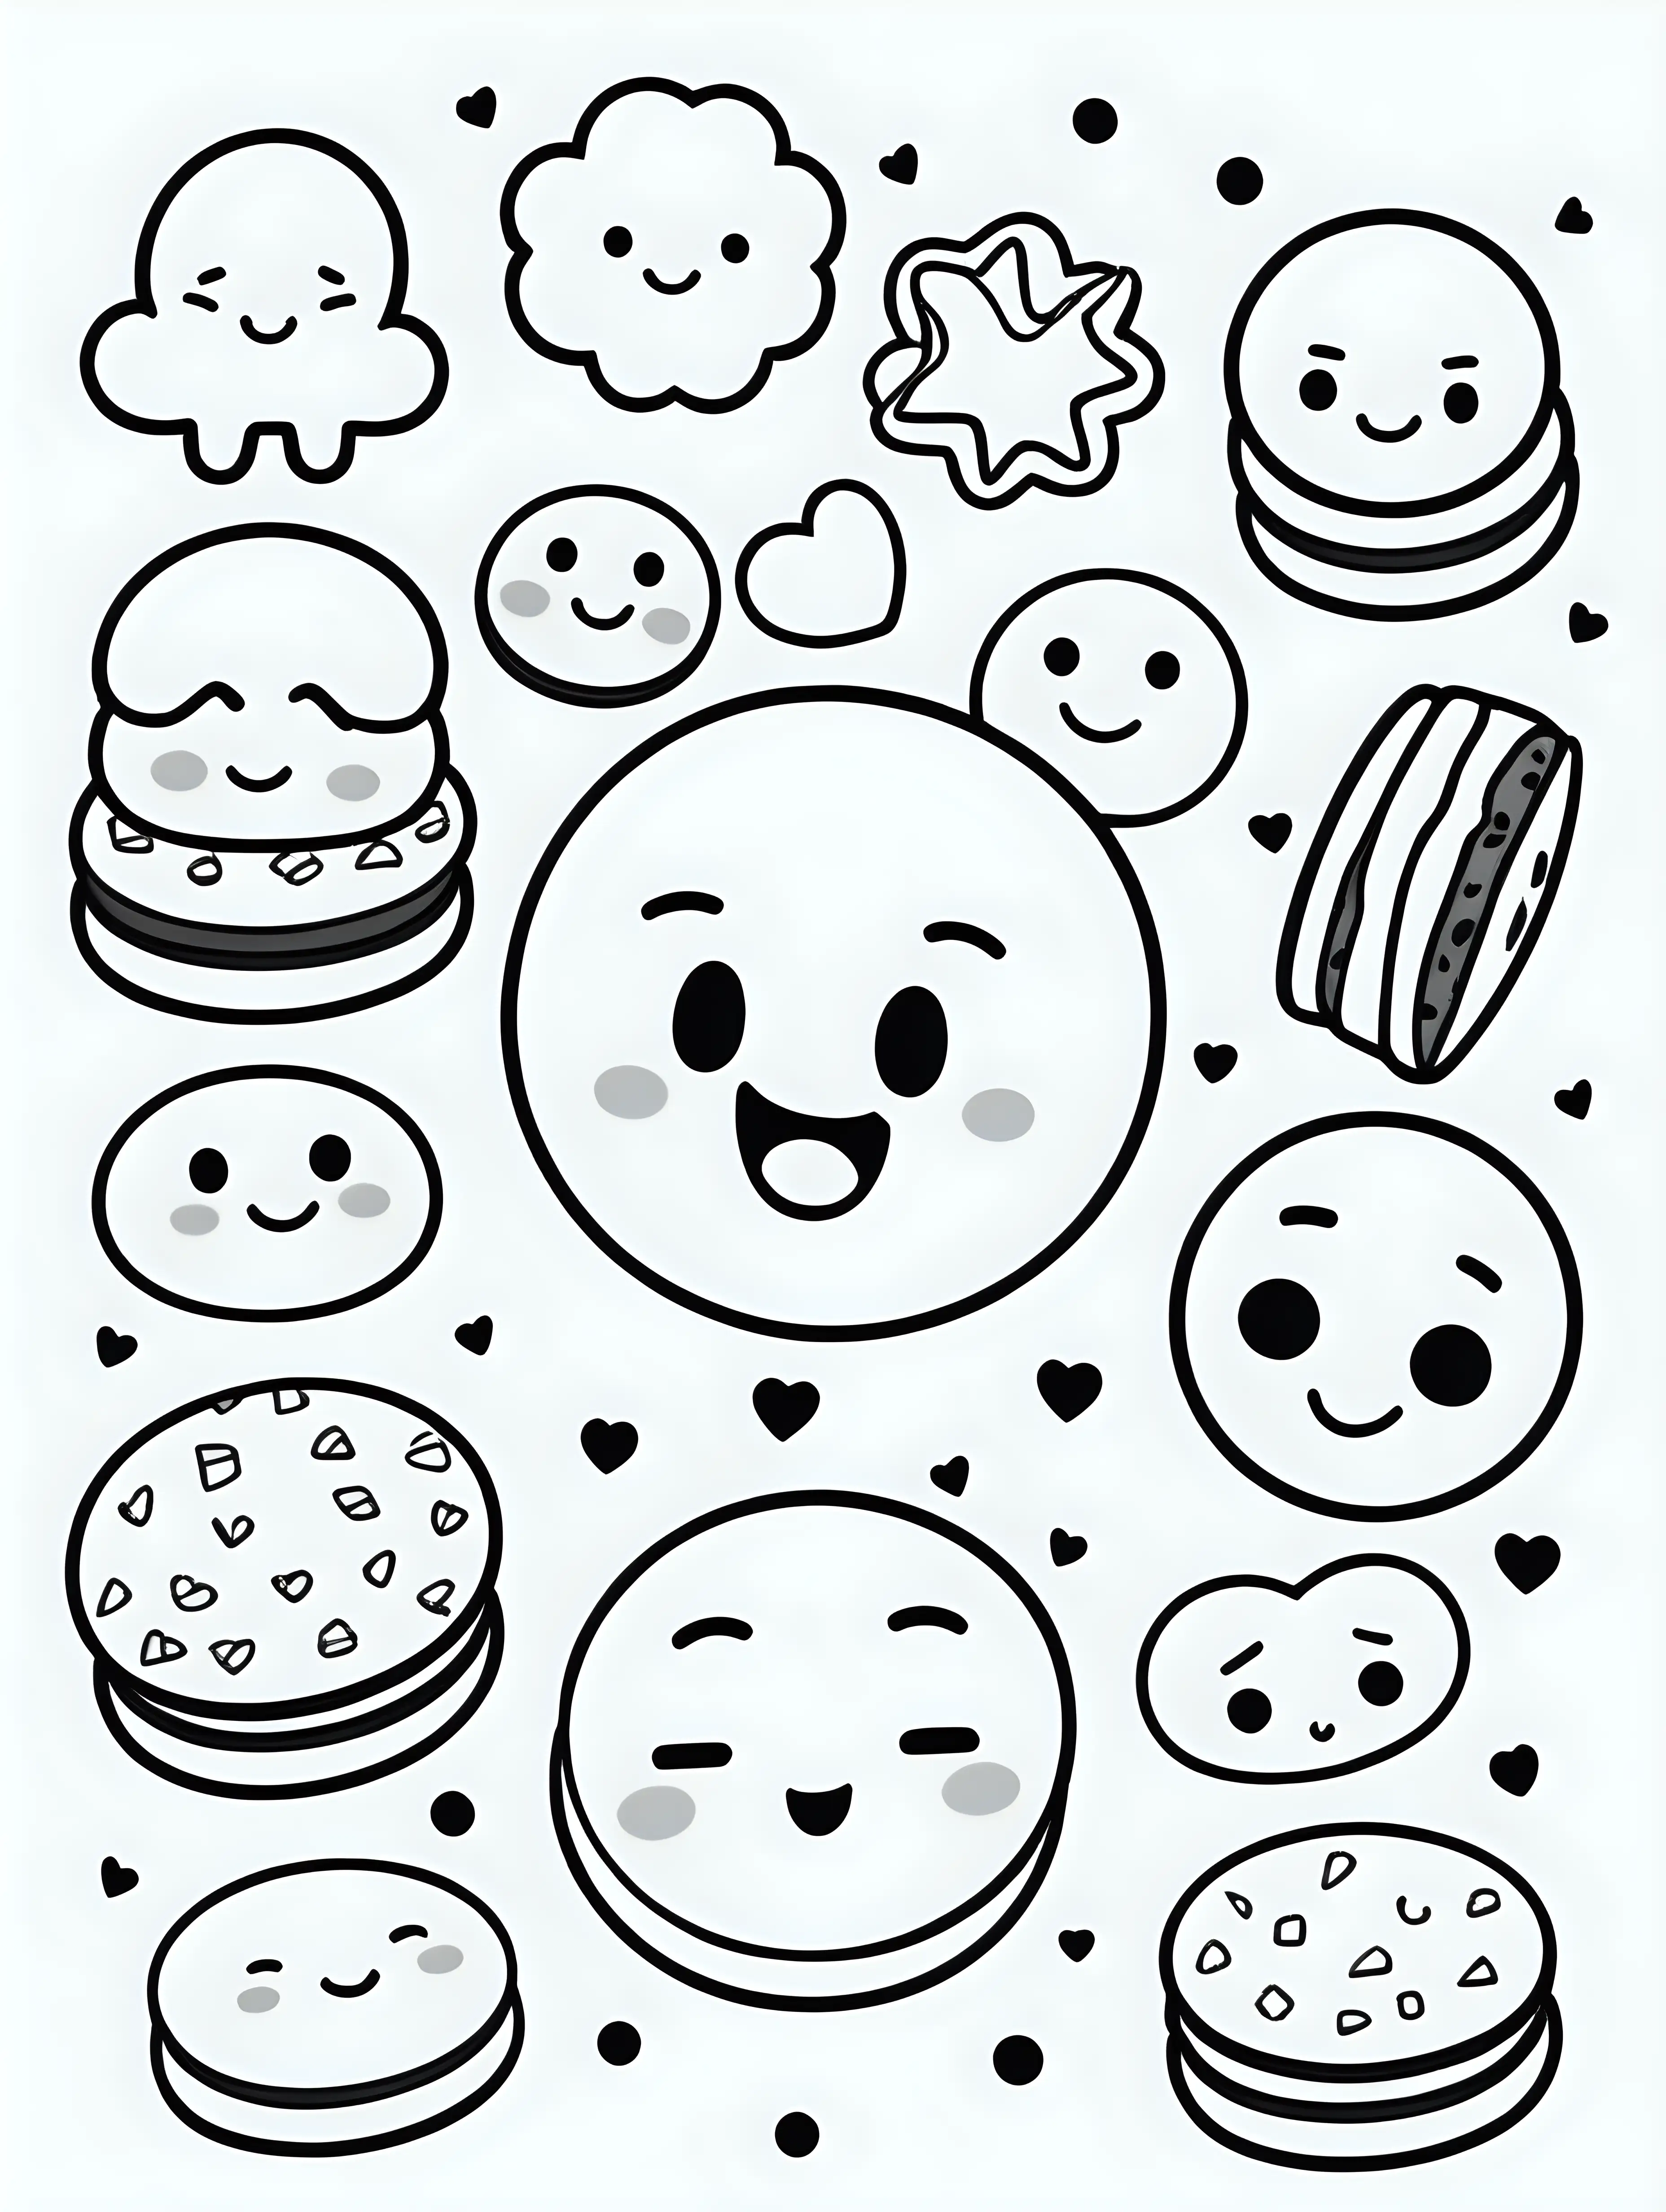 Adorable Cartoon Drawing of Cute Cookies on Clean White Background